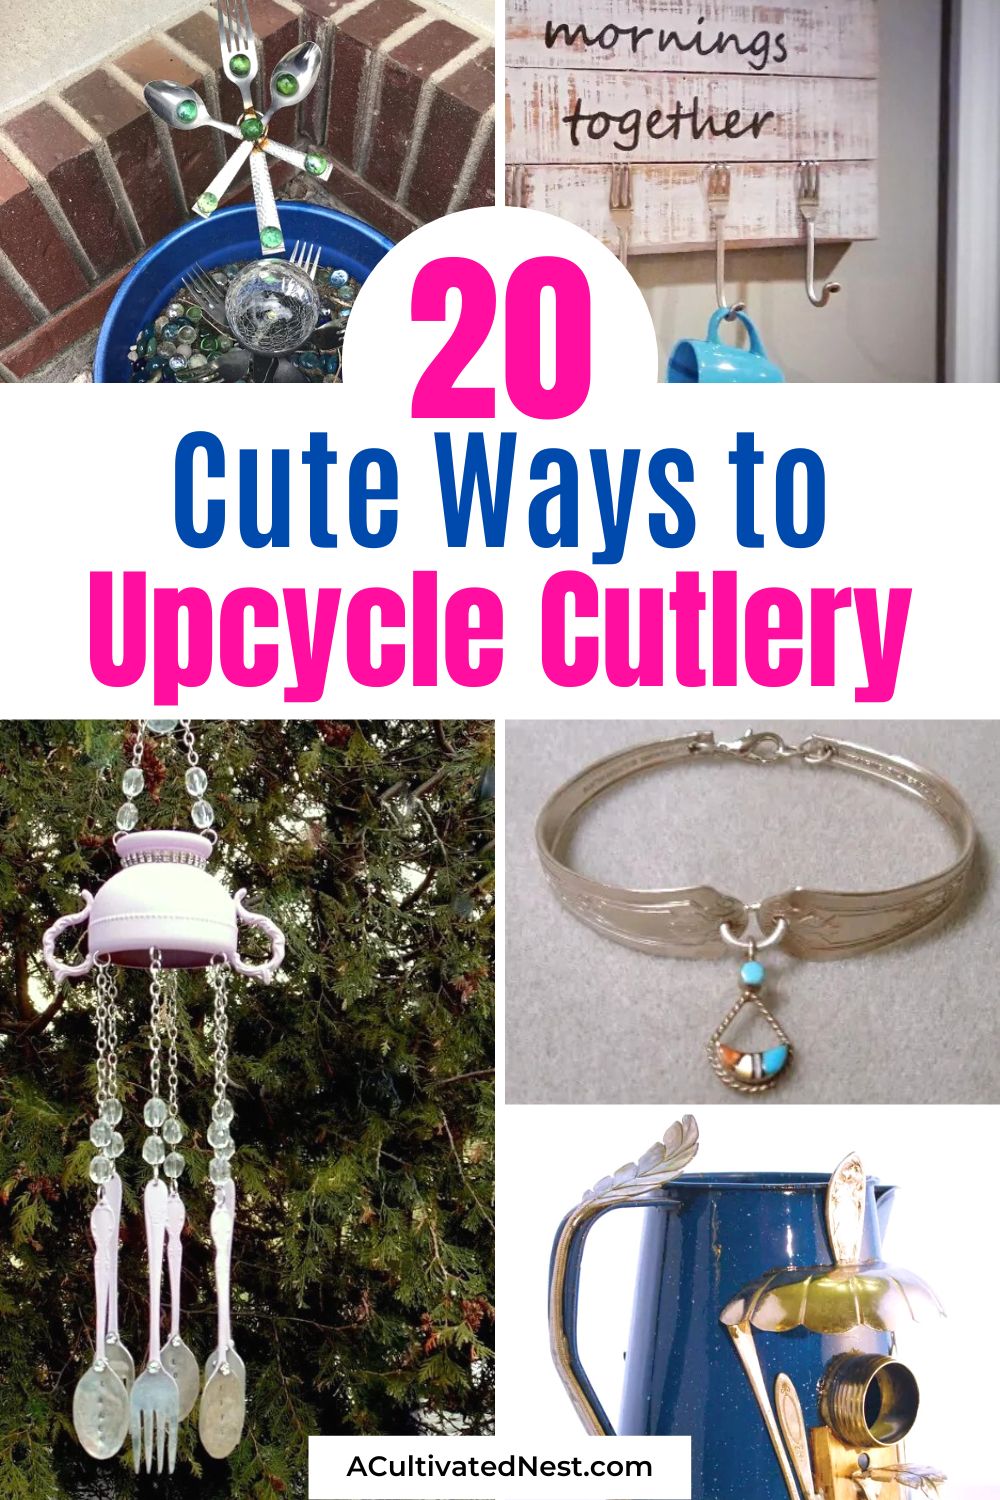 20 Beautiful Cutlery Upcycle Projects- Get inspired by these beautiful cutlery upcycle projects! From elegant wind chimes to whimsical garden markers, there's something for everyone. Upcycle your old spoons, forks, and knives into beautiful crafts that will impress your friends and add a touch of creativity to your home. | #upcycleideas #cutlerycrafts #DIYinspiration #craft #ACultivatedNest